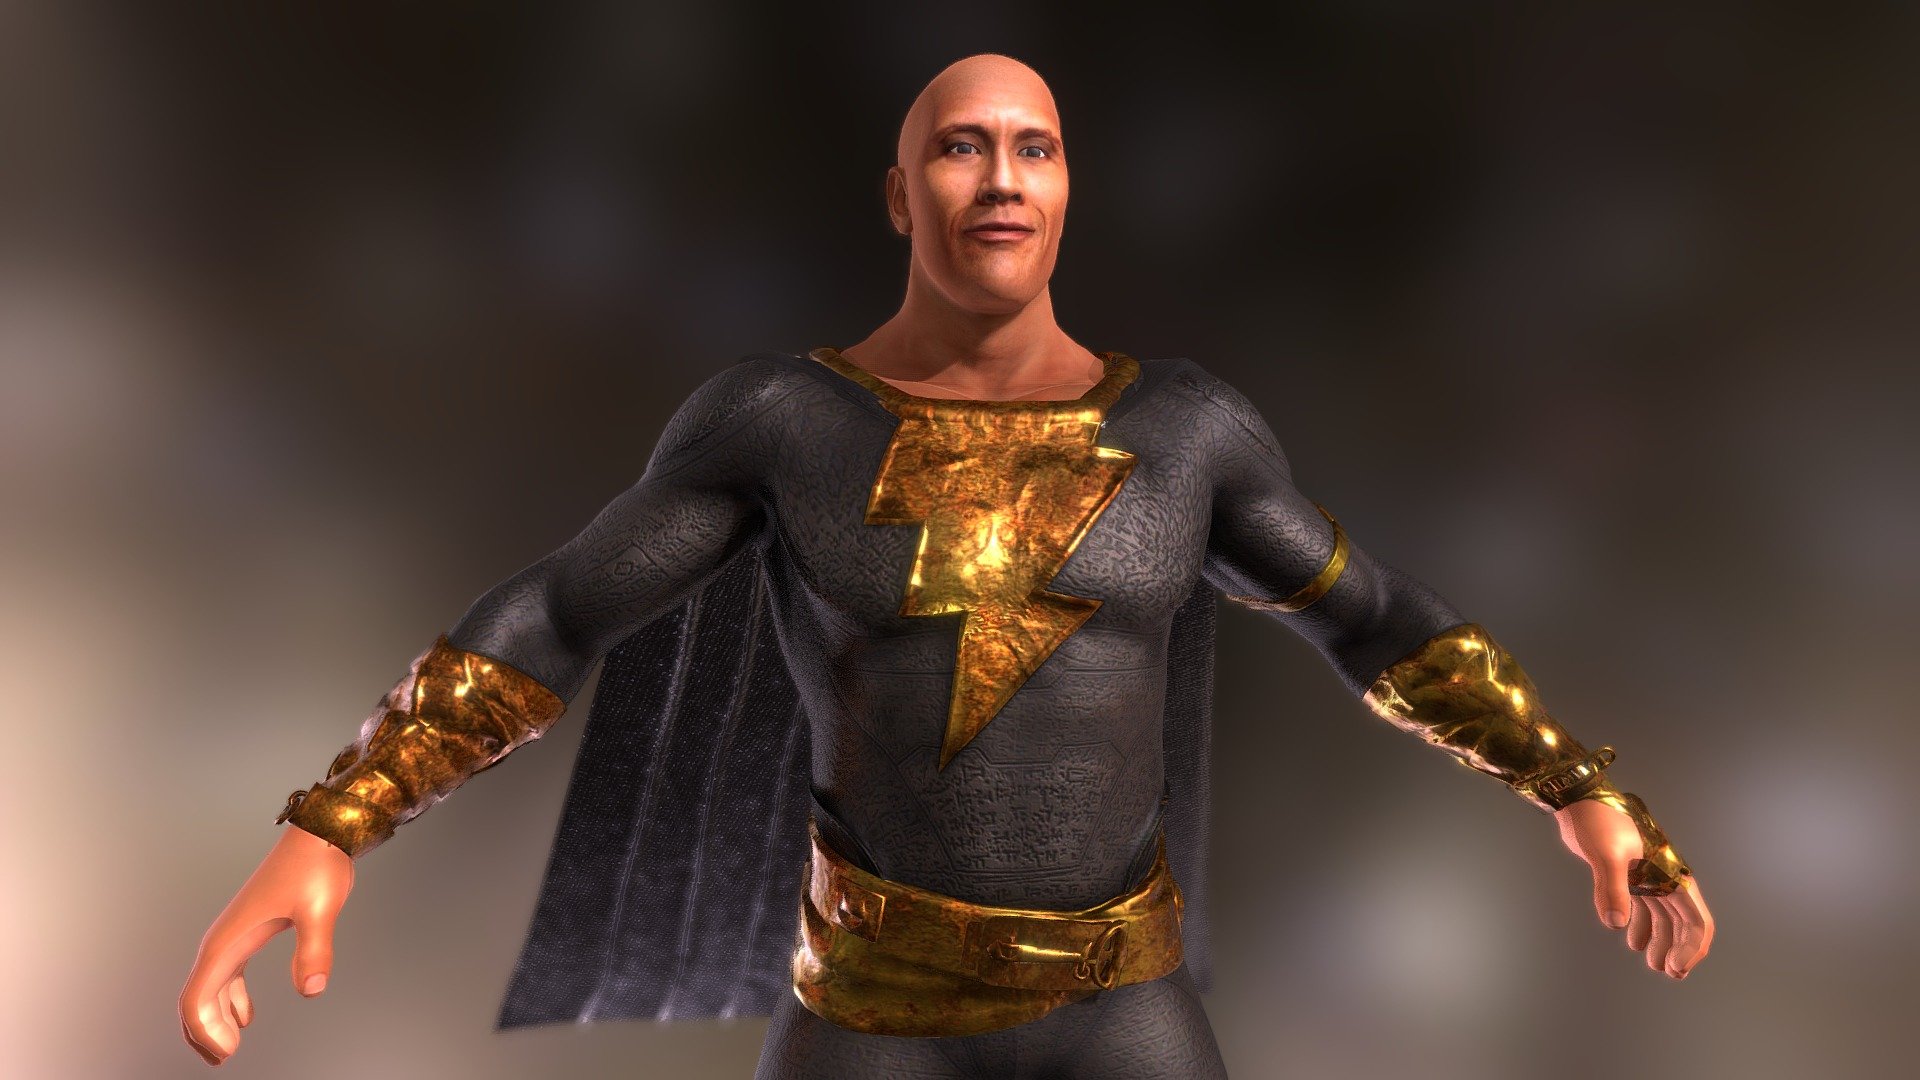 Black adam the Rock new suit model
1) fully rigged
2) facial bones
3) 2k textures added
4) Ready to use in animations &amp; games
.
.
For more details contact - instagram id - akcreationshd - Black Adam - Dwayne Johnson's 3D Model - Buy Royalty Free 3D model by Ak Creations (@akcreations) 3d model